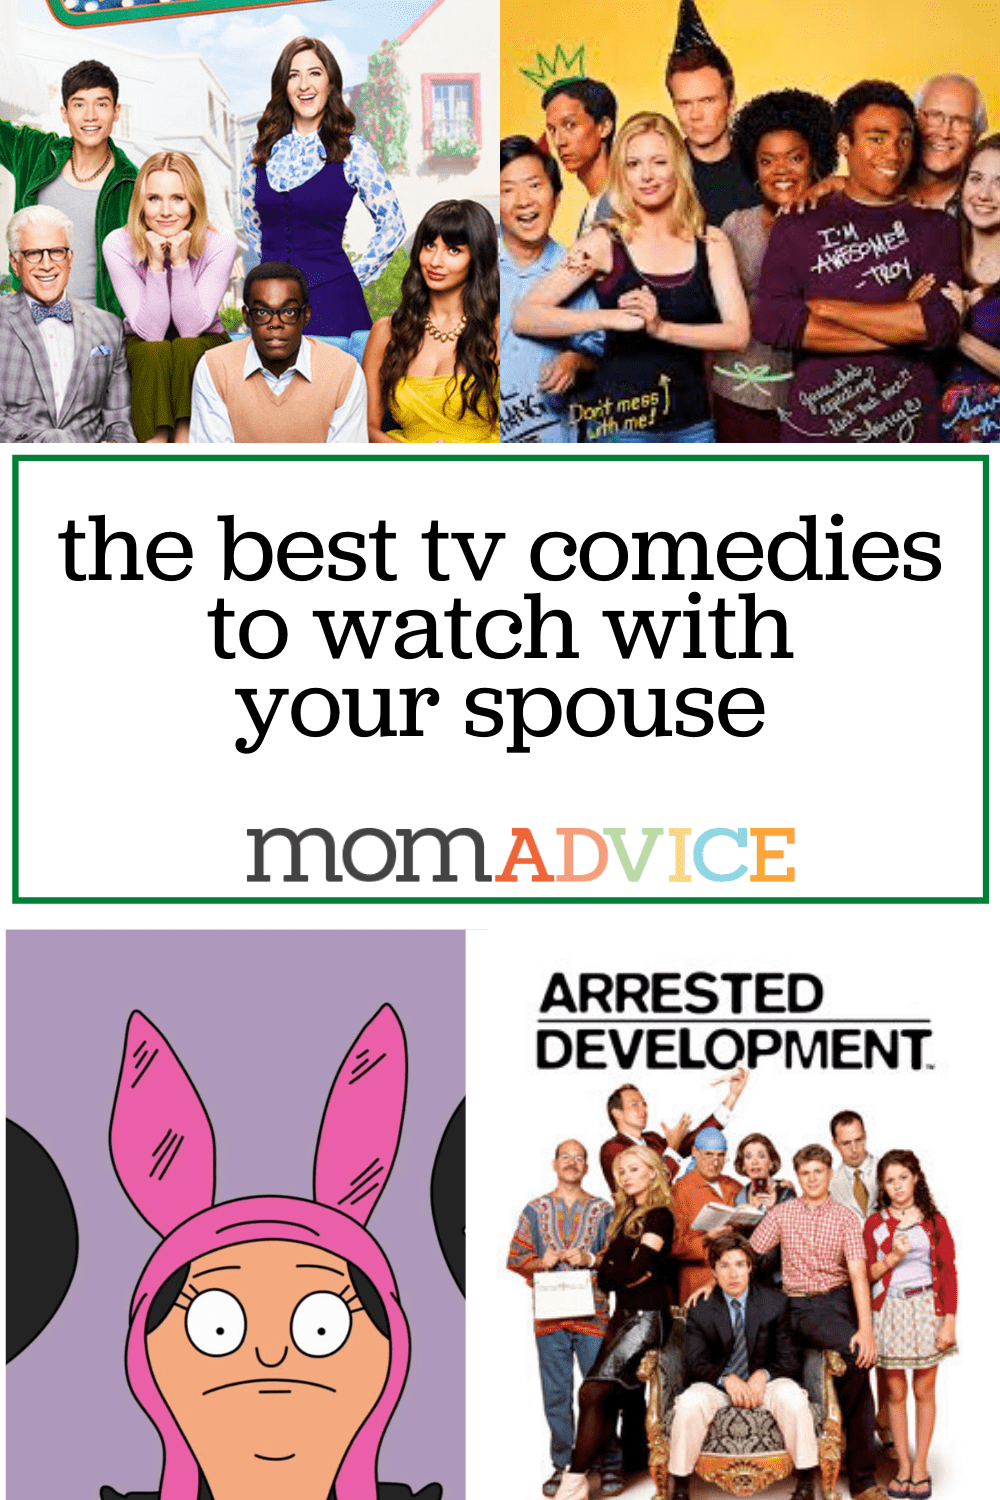 Hilarious TV Shows to Watch from MomAdvice.com